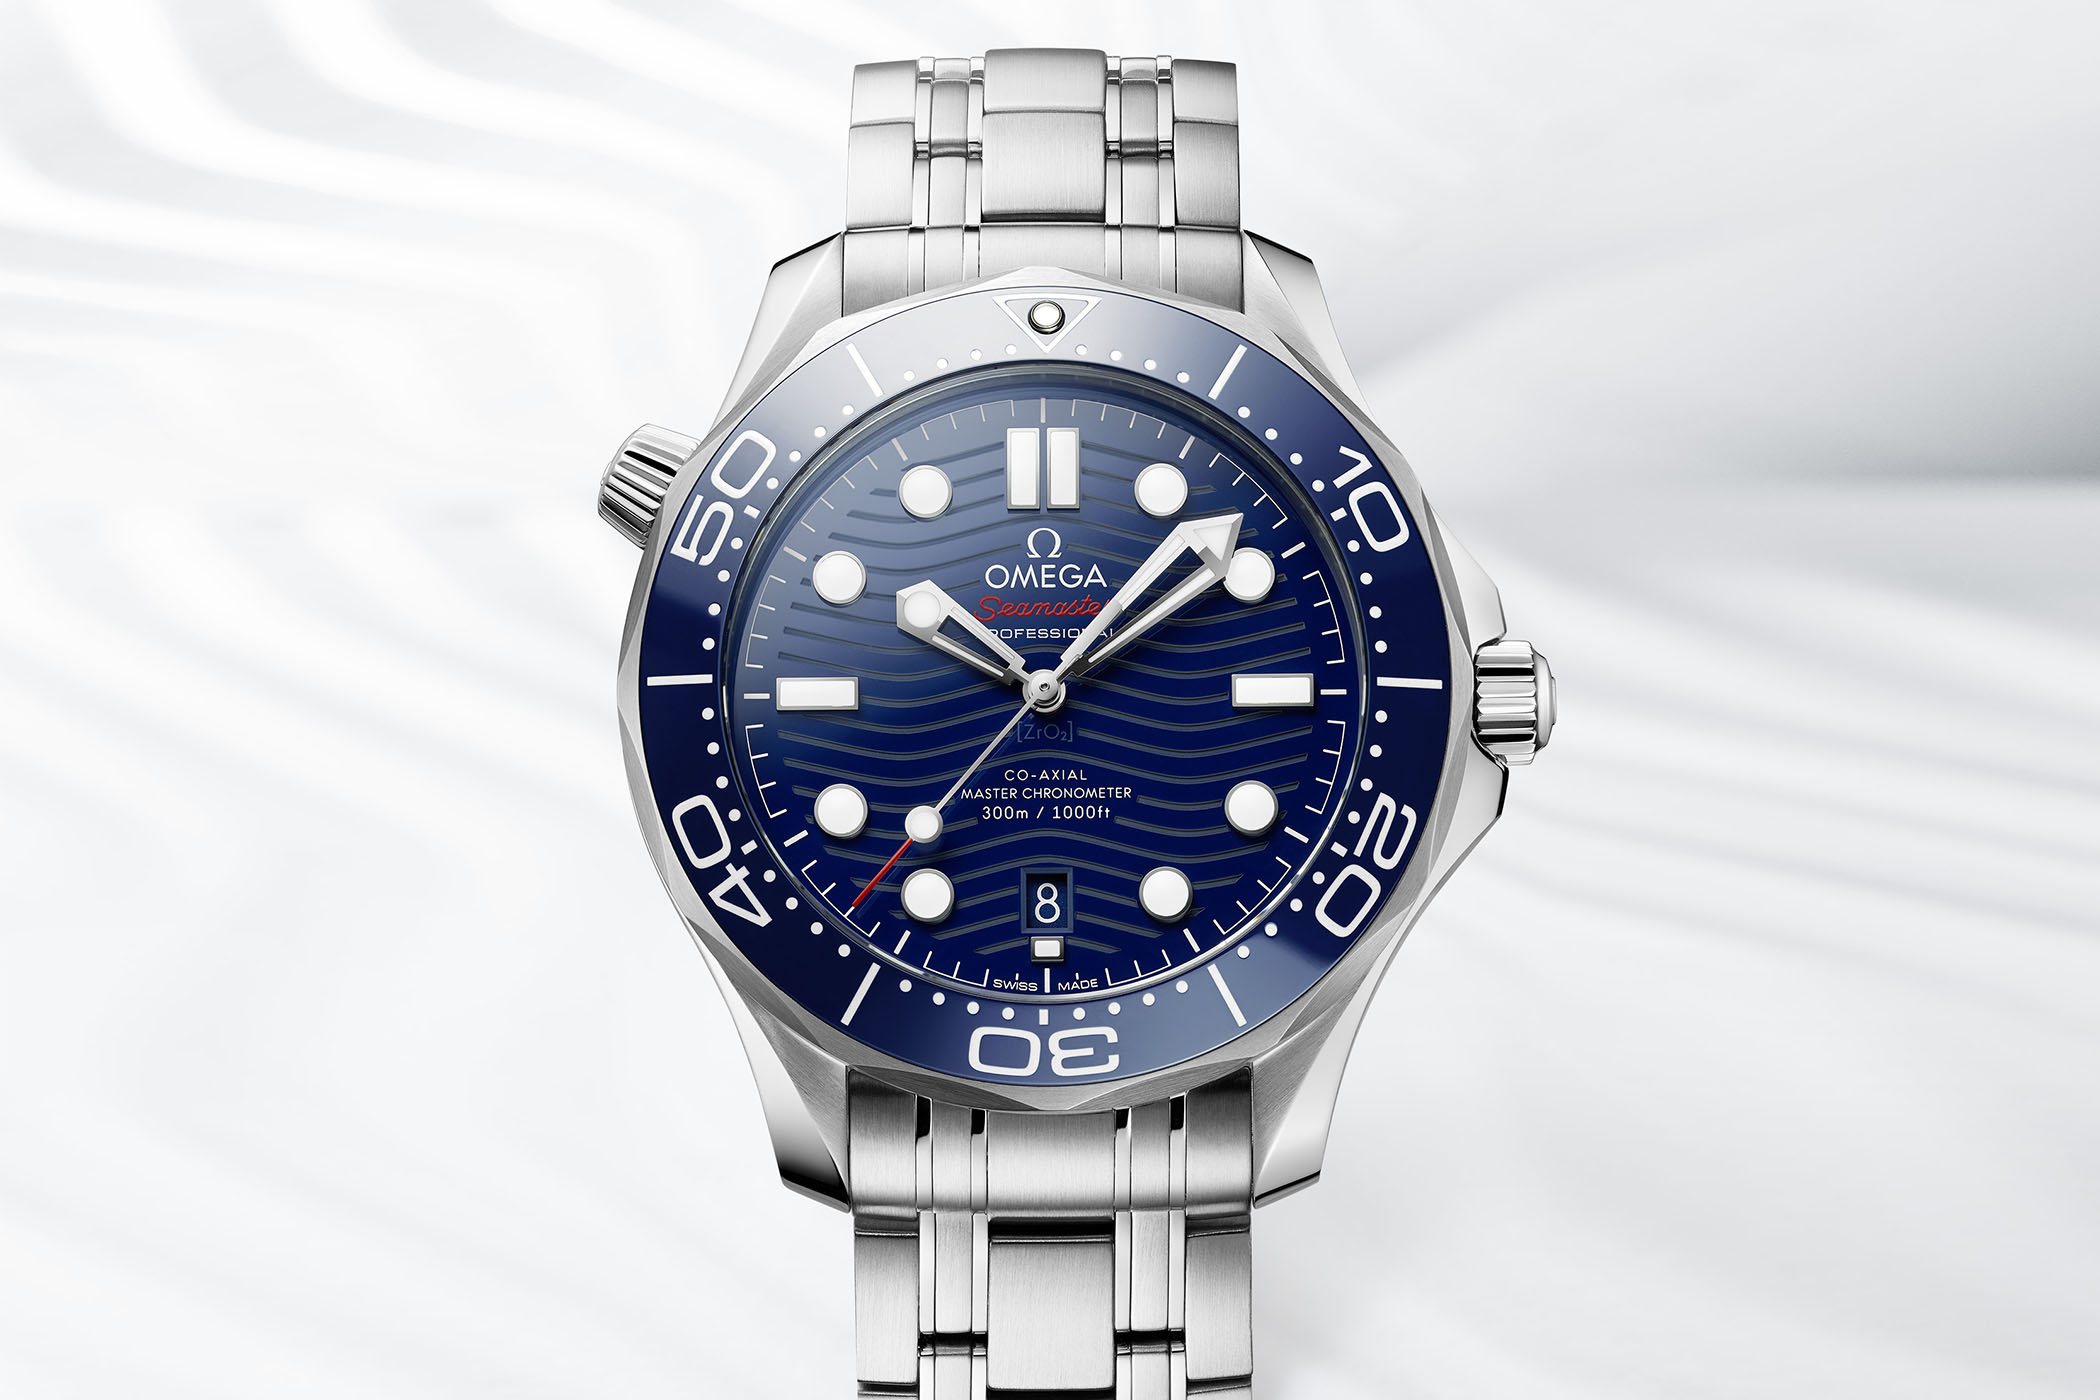 Baselworld 2018 - The new Omega Seamaster Diver 300M ...